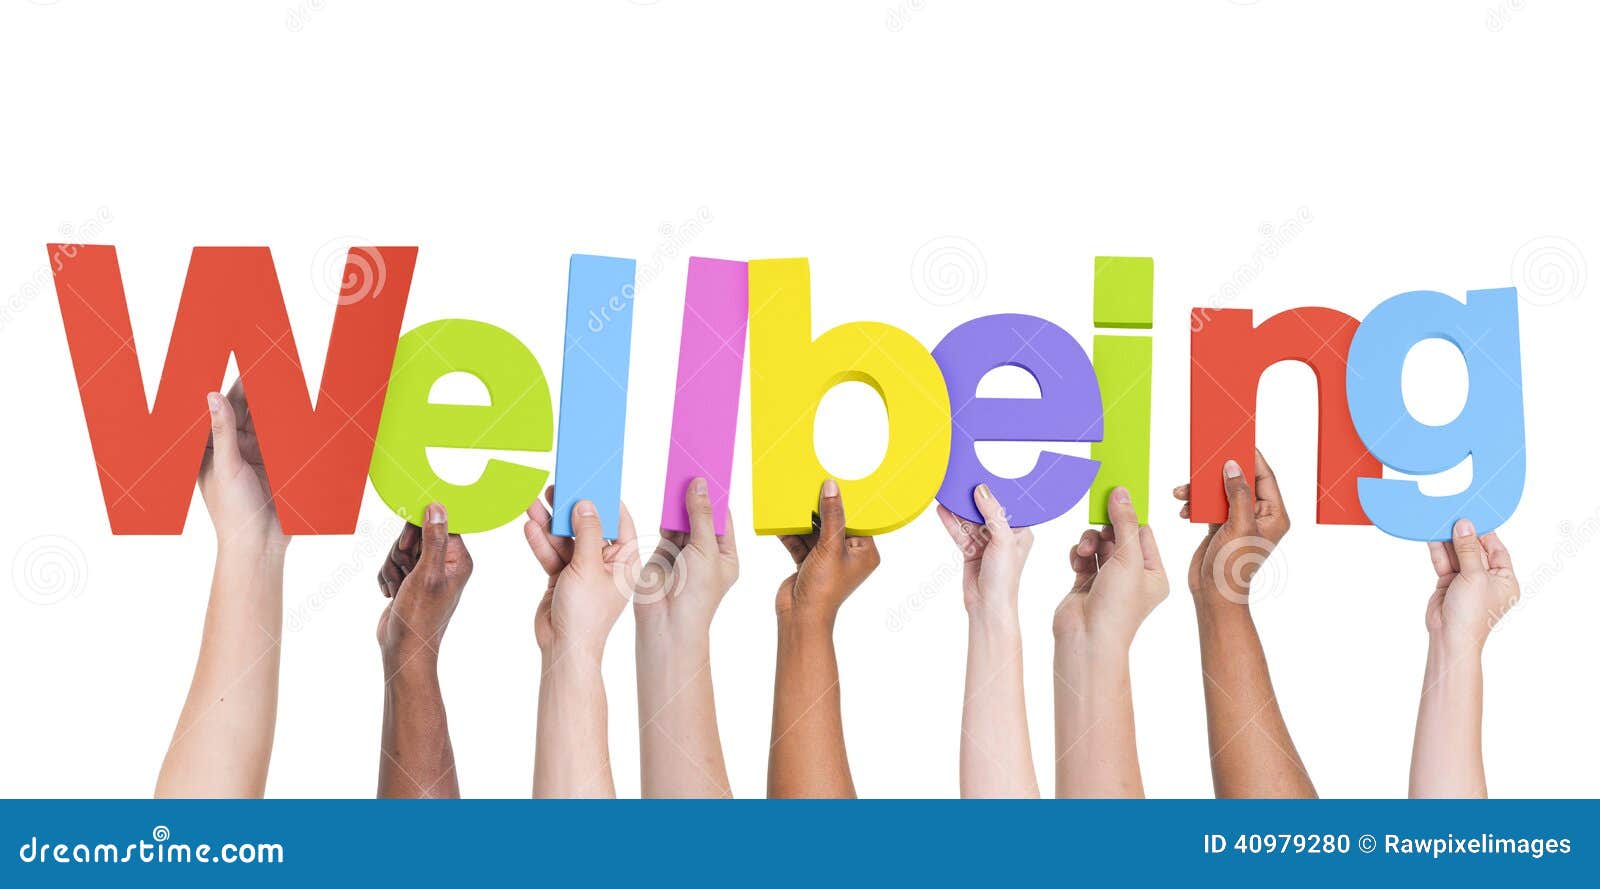 diverse hands holding the word wellbeing